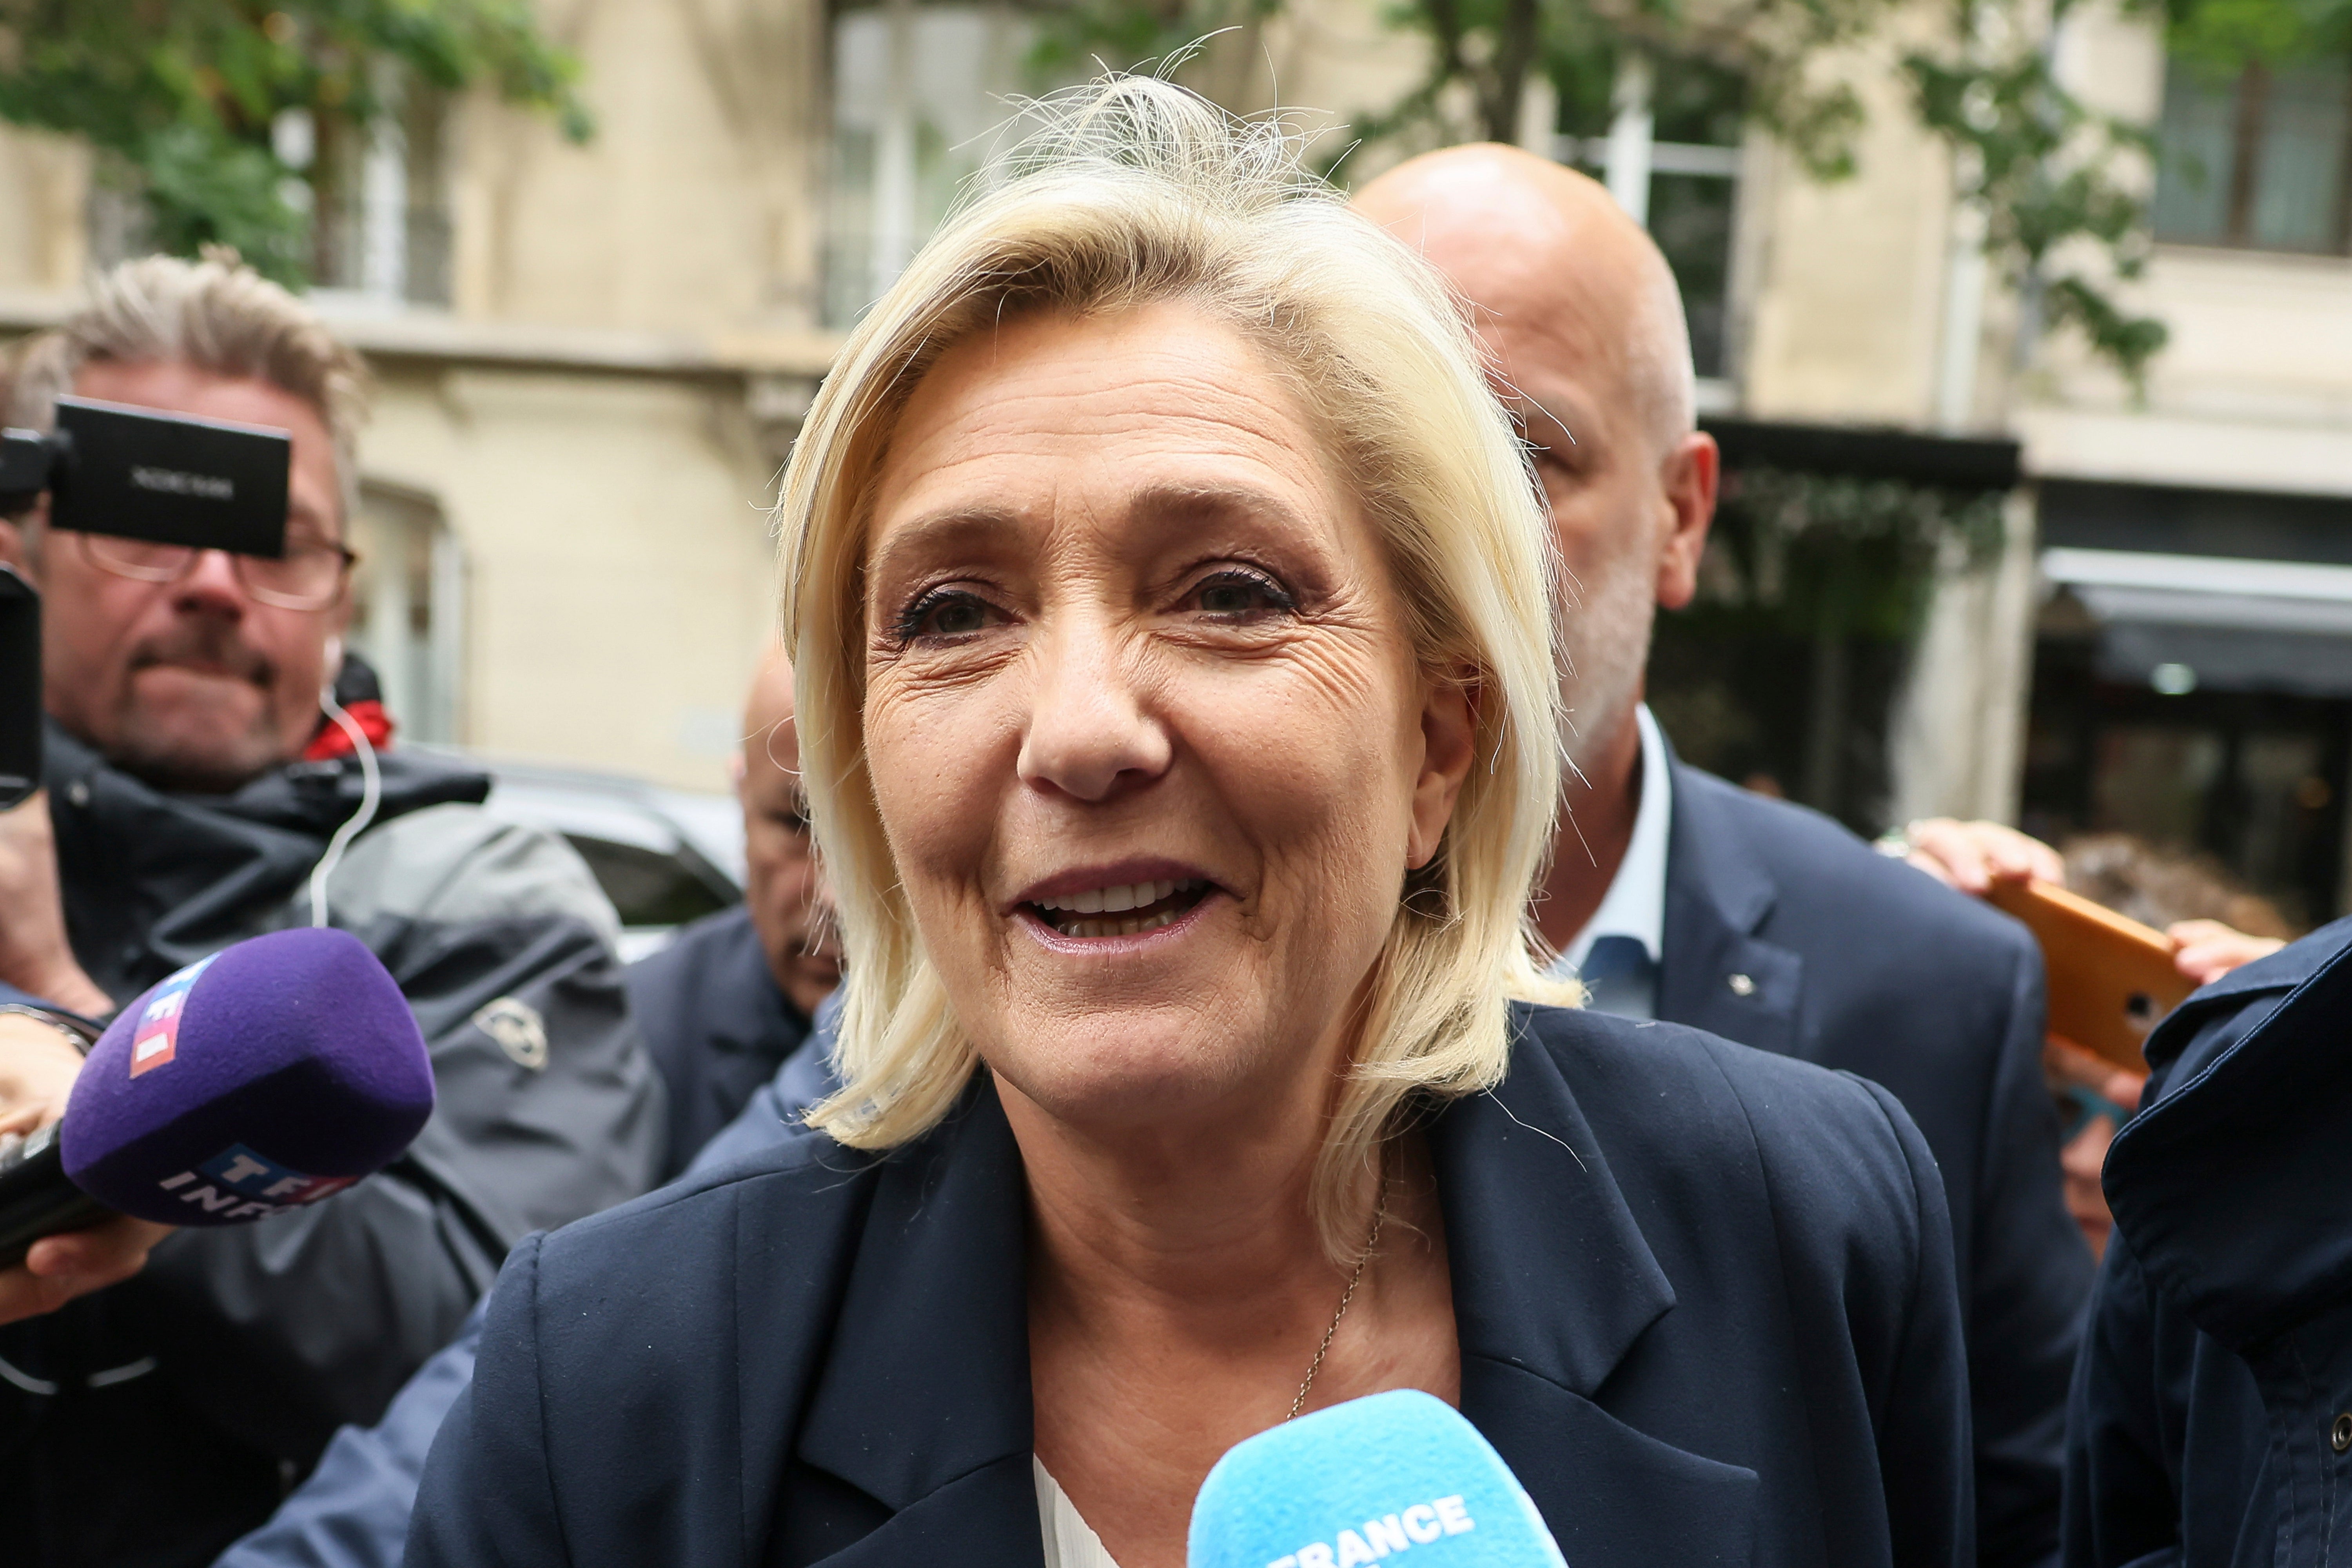 Mr Macron said the policies of far-right National Rally and extreme leftwing La France Insoumise divided and isolated people, which would lead to a “civil war” between different communities. Pictured: National Rally’s Marine Le Pen